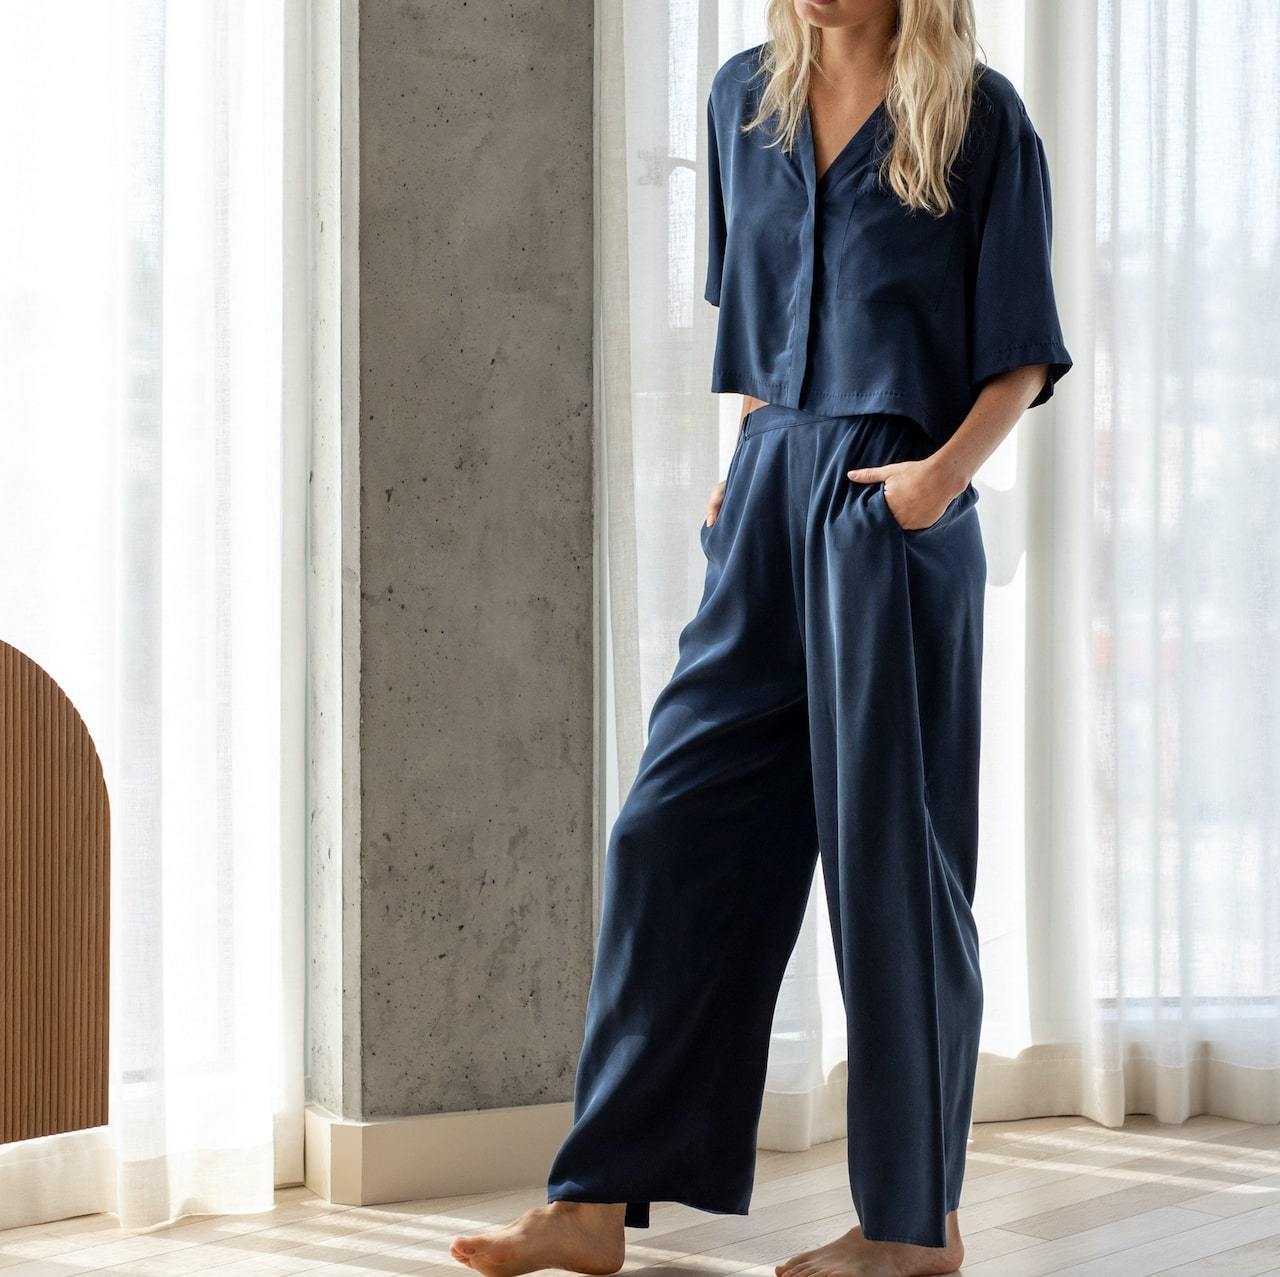 11 Chic Pajama Sets to Lounge in All Day | Entertainment Tonight